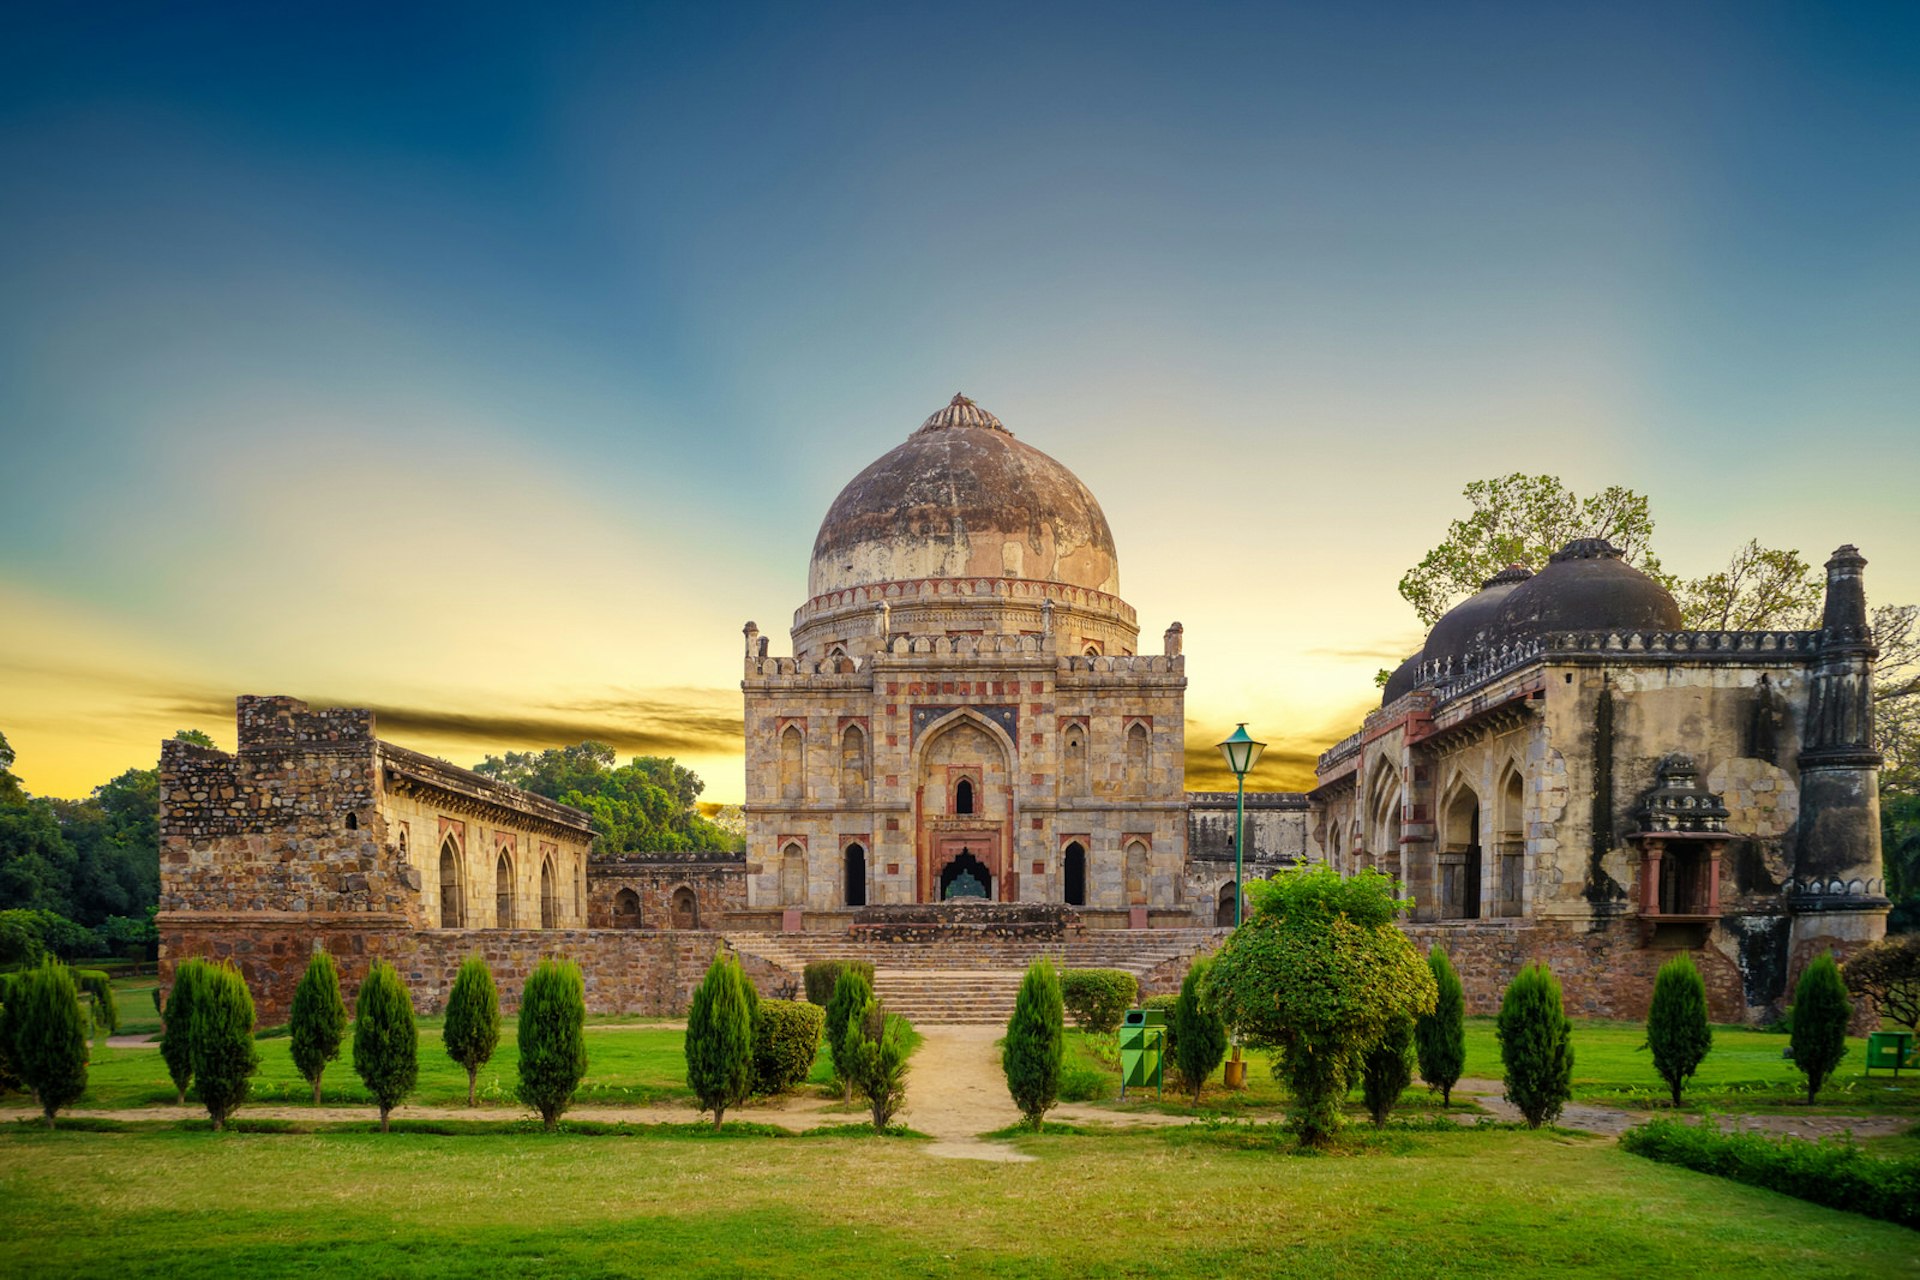 Baba Gumbad dome in the Lodi Garden